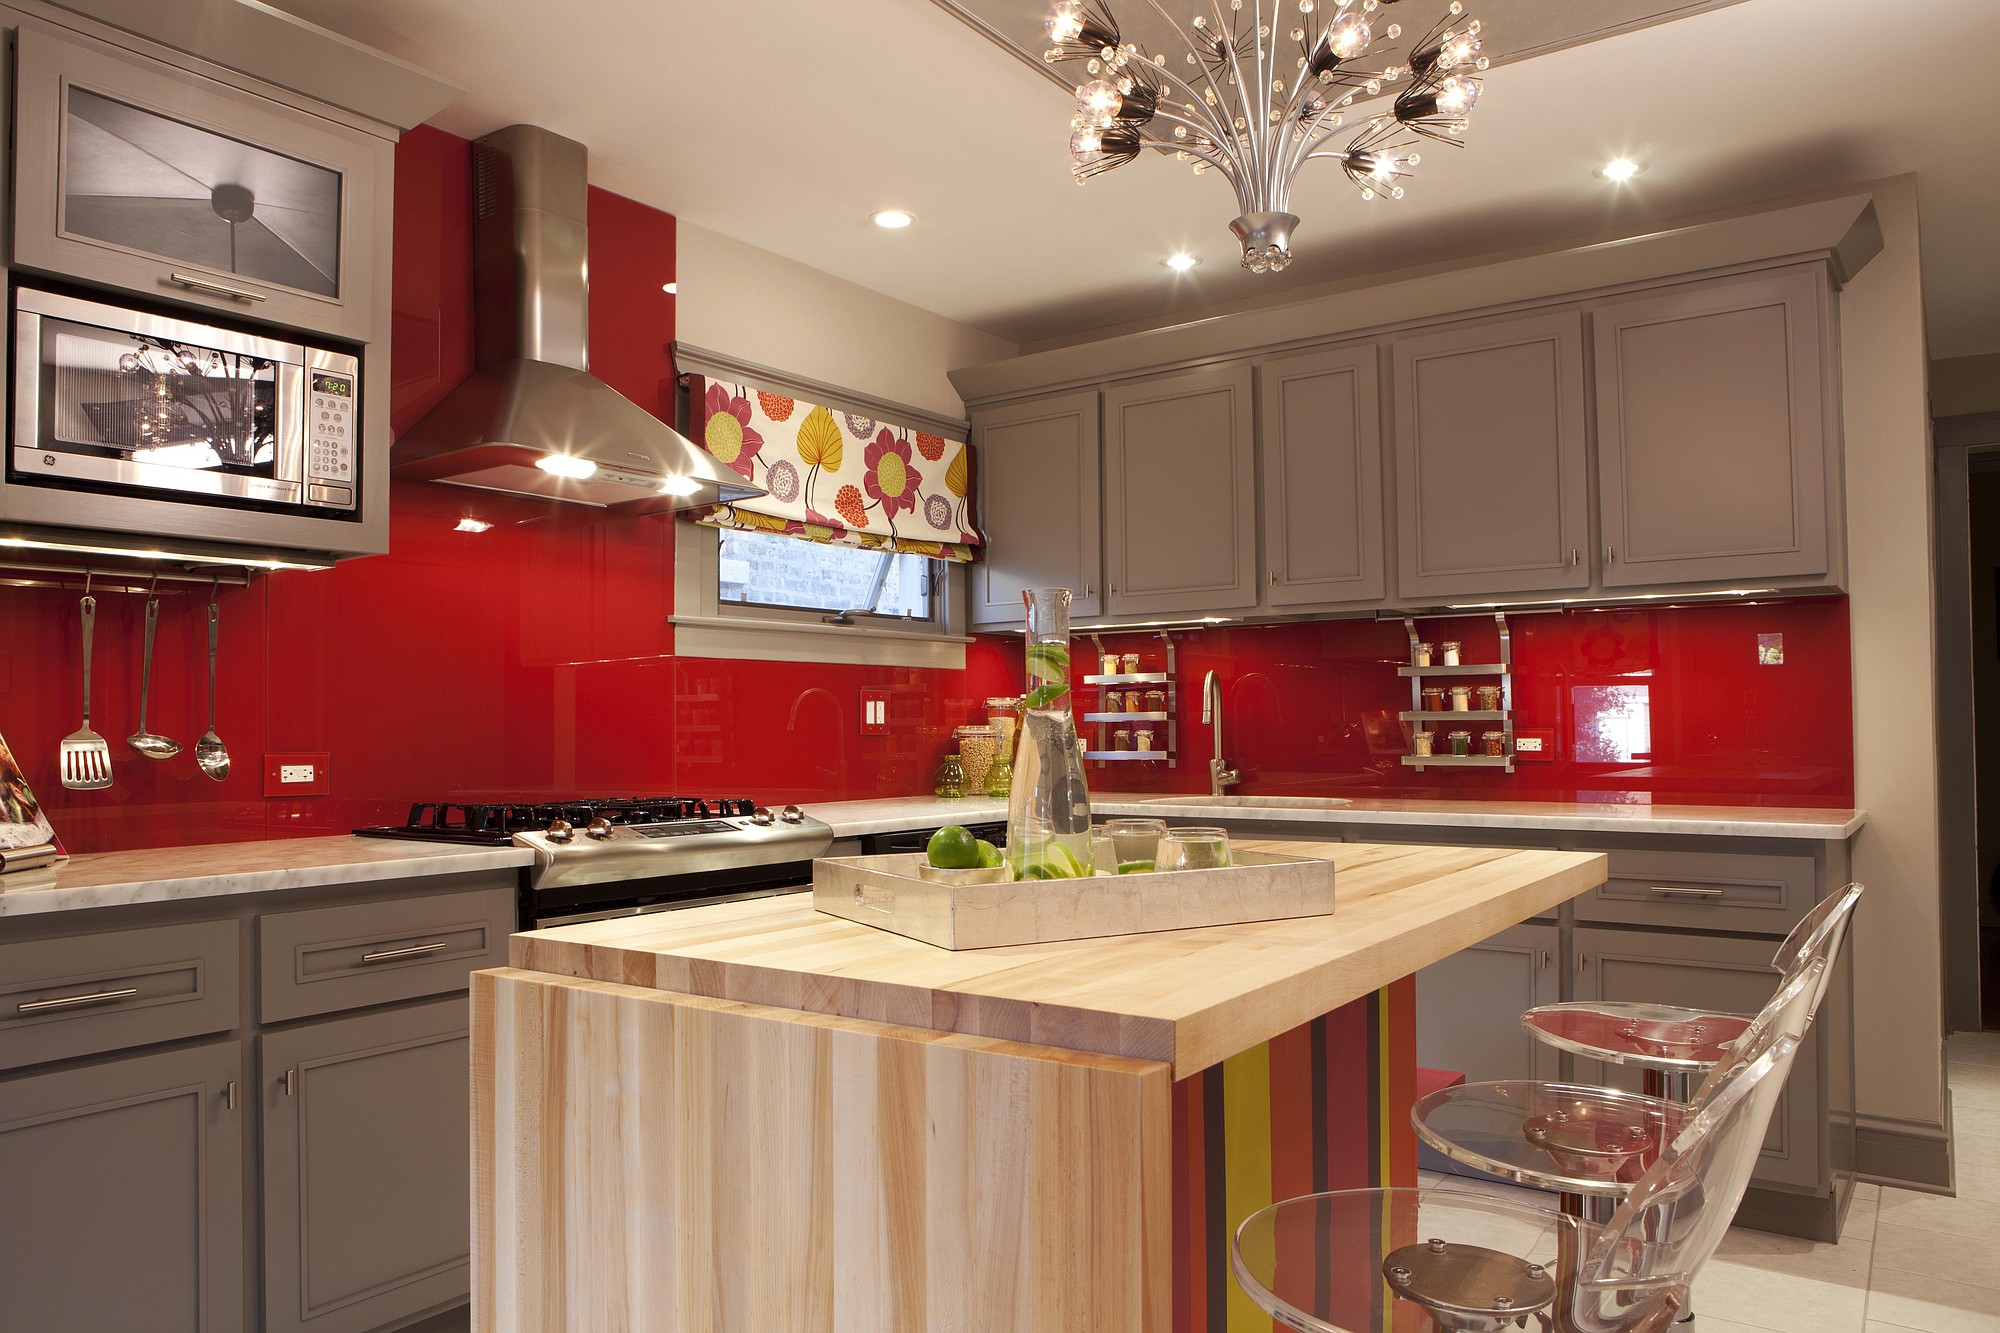 Designer and host of HGTV's Great Rooms, Meg Caswell, painted the walls red then added a clear glass cover to create a chic, vibrant backsplash.